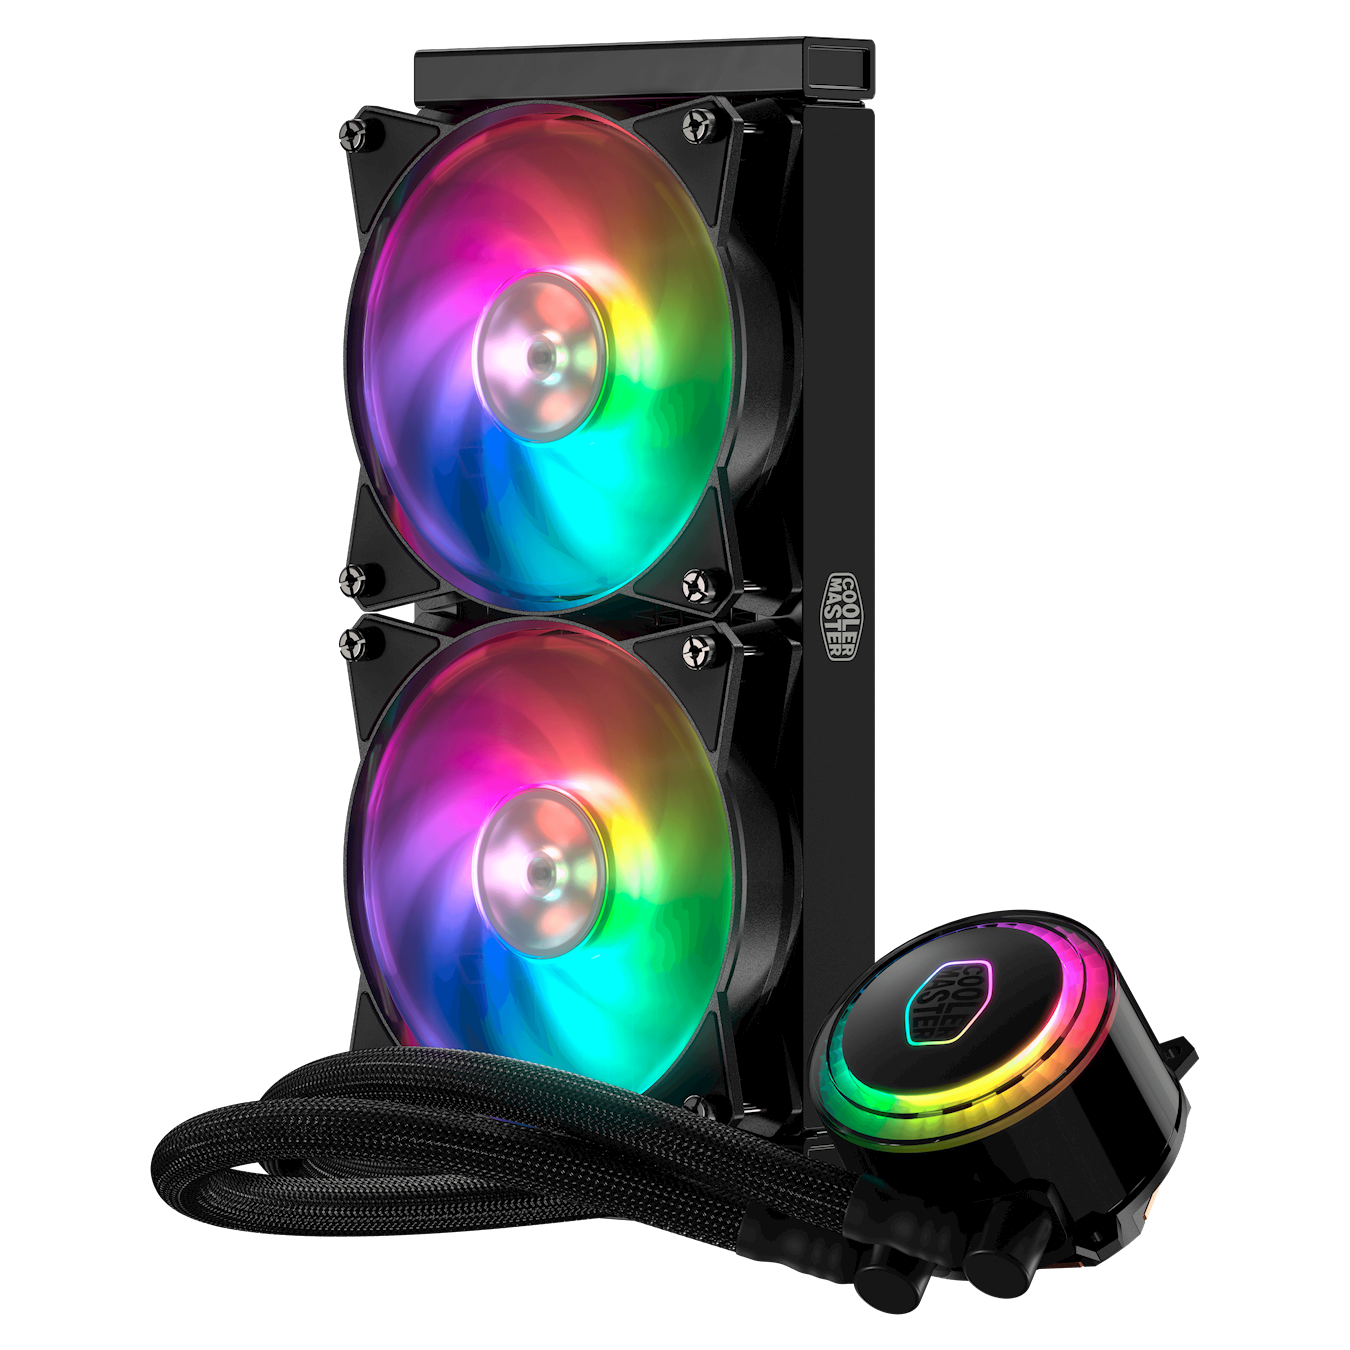 Addressable RGB LEDs on the pump and fans for full color customization that can be controlled through Cooler Master software CM Plus